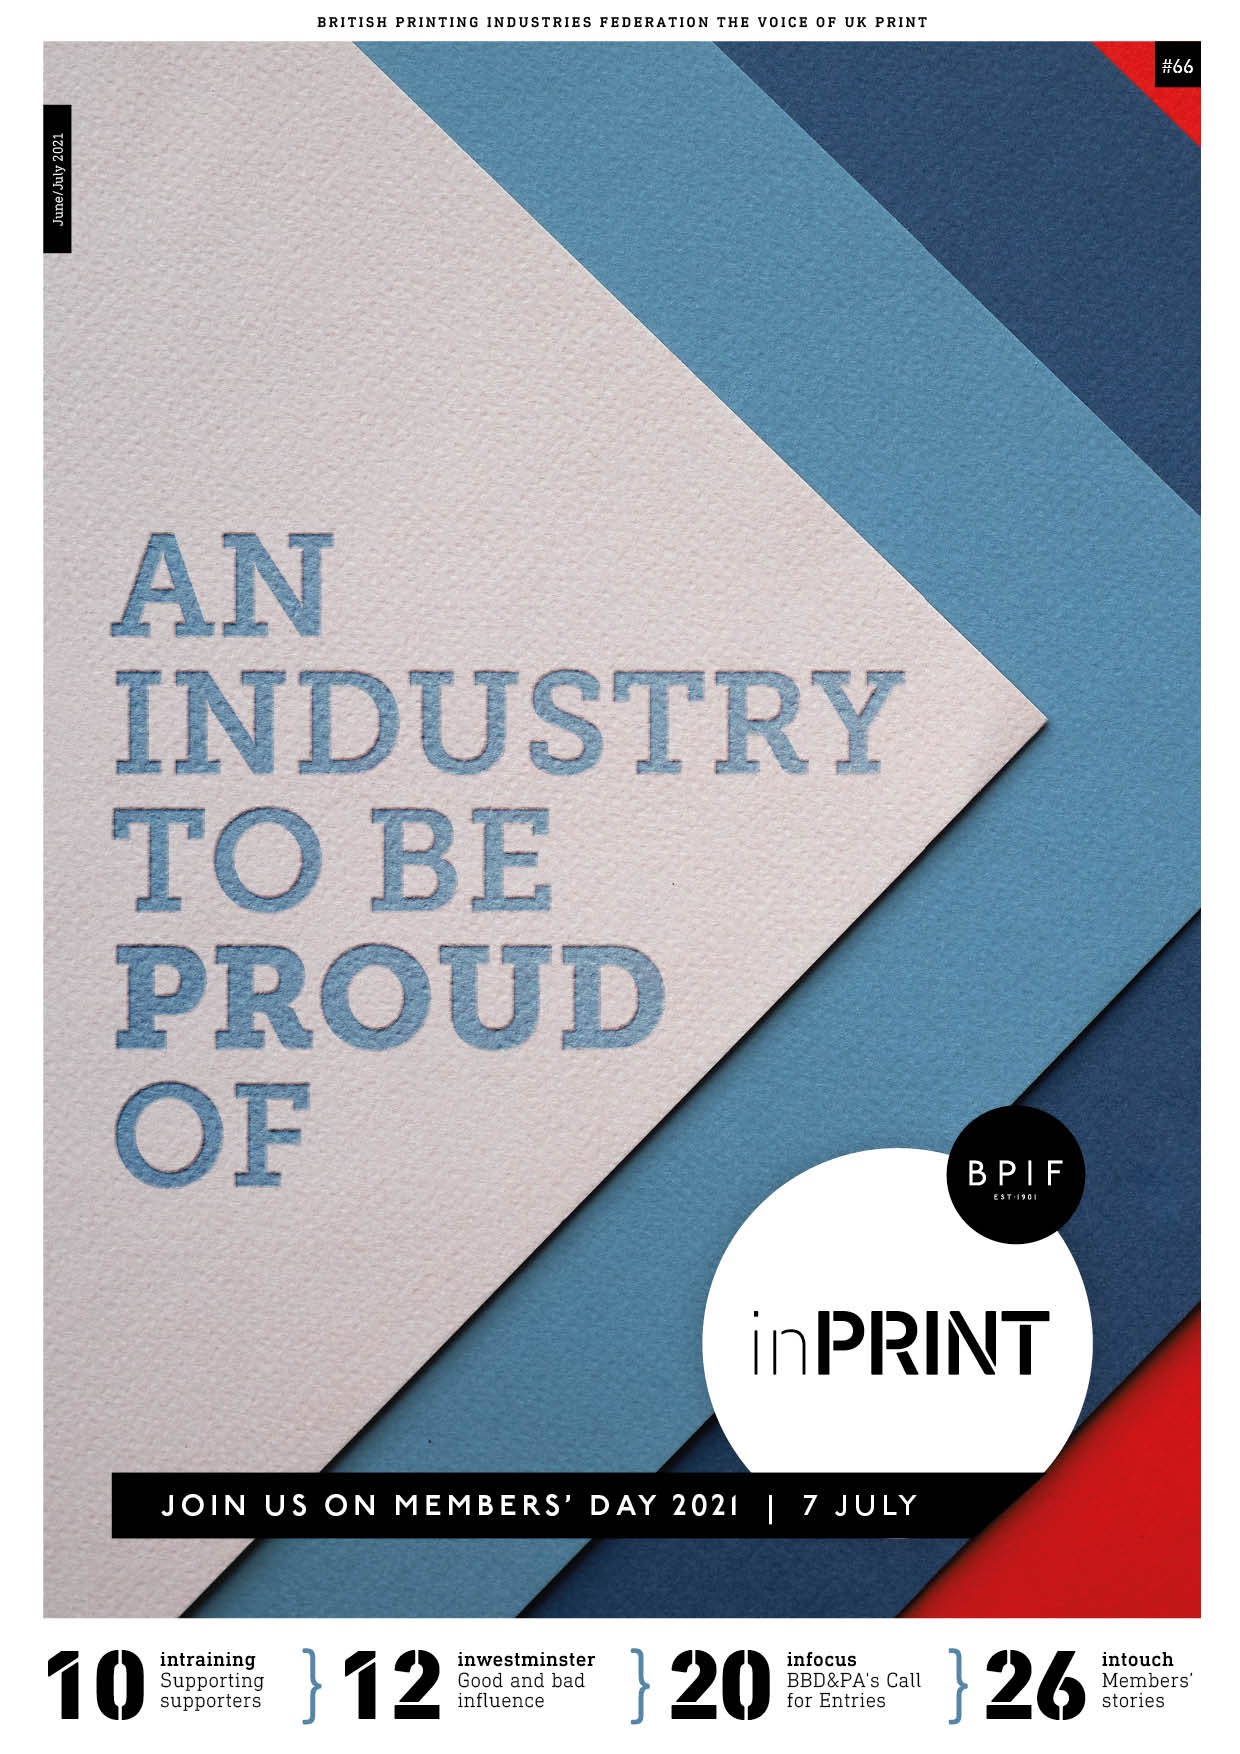 Inprint Issue 66 